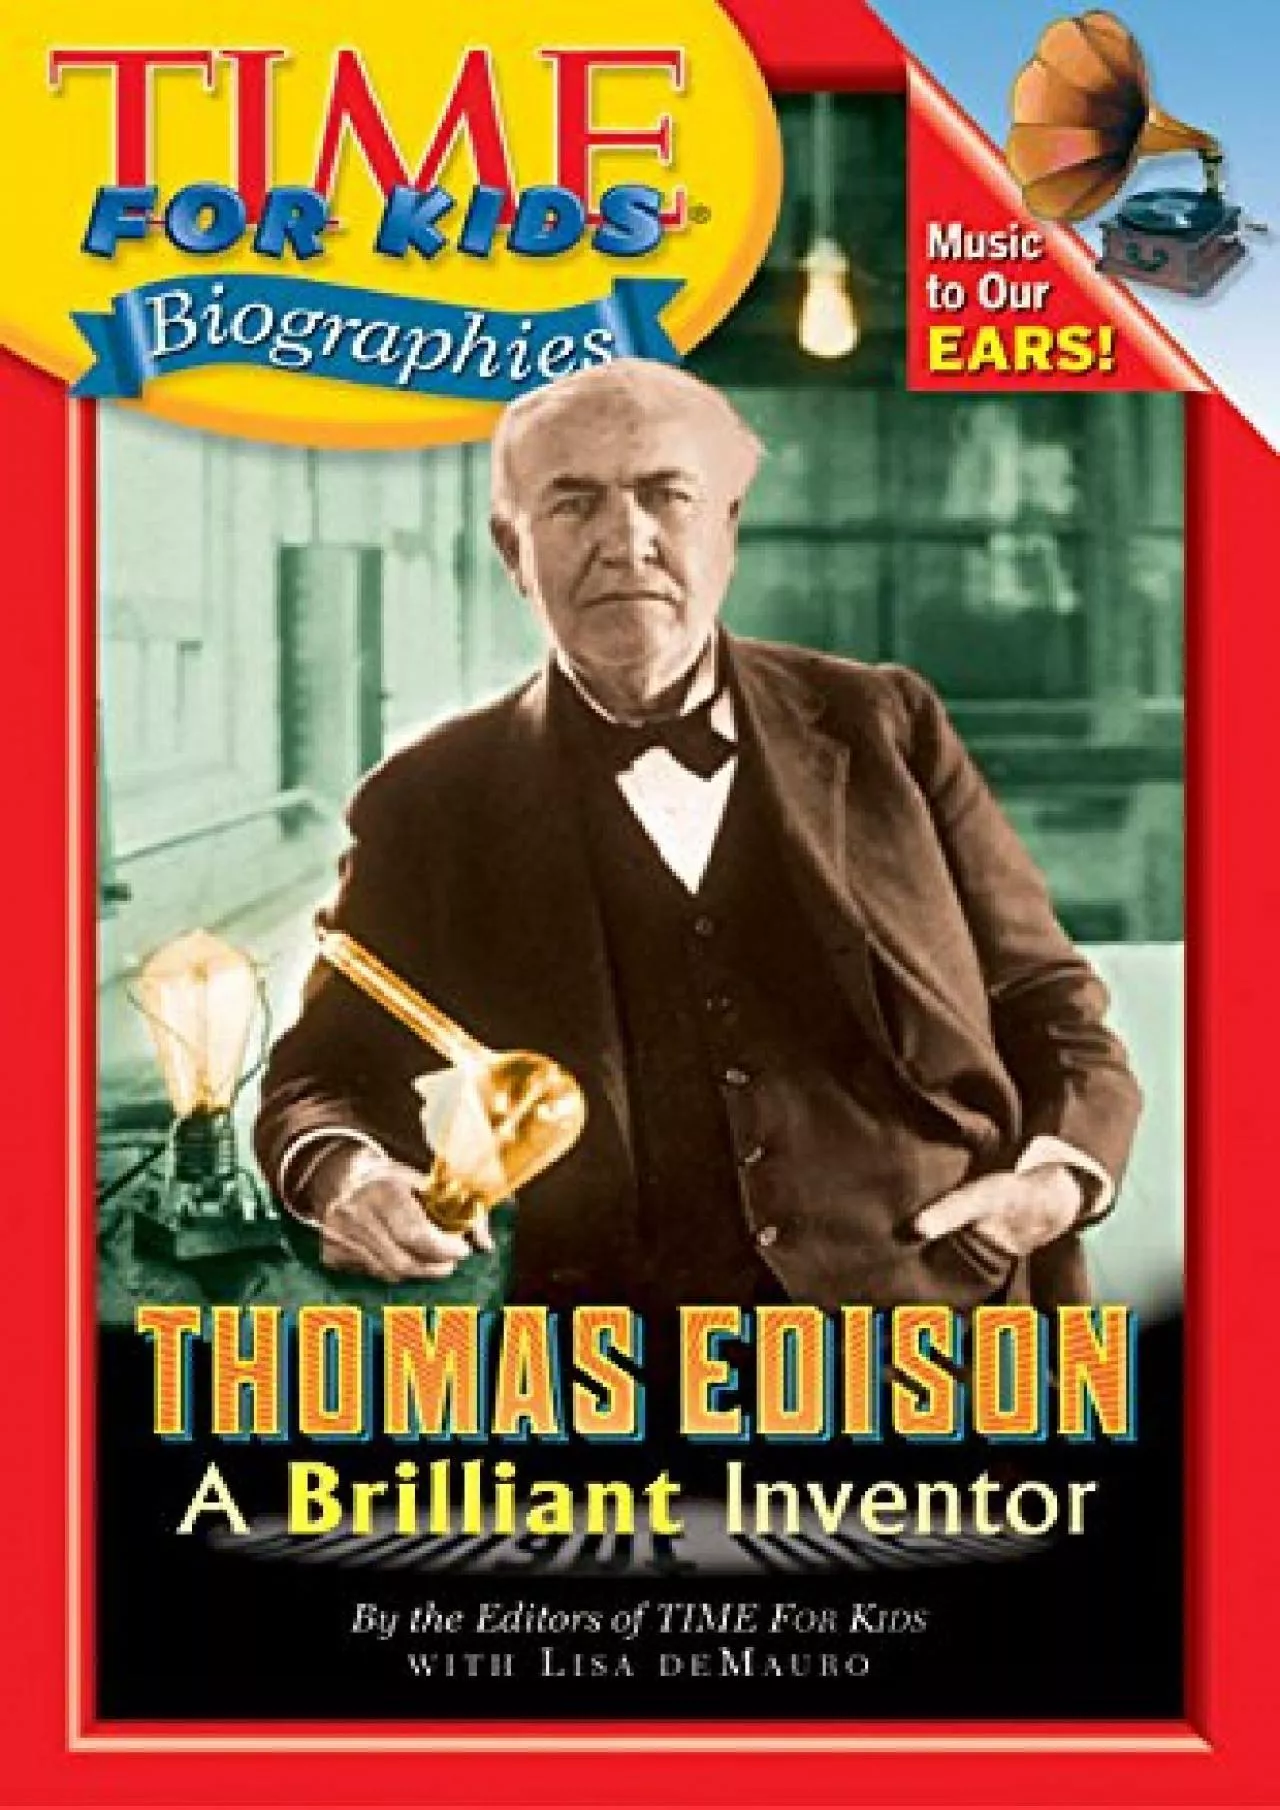 [EBOOK]-Time For Kids: Thomas Edison: A Brilliant Inventor (Time For Kids Biographies)